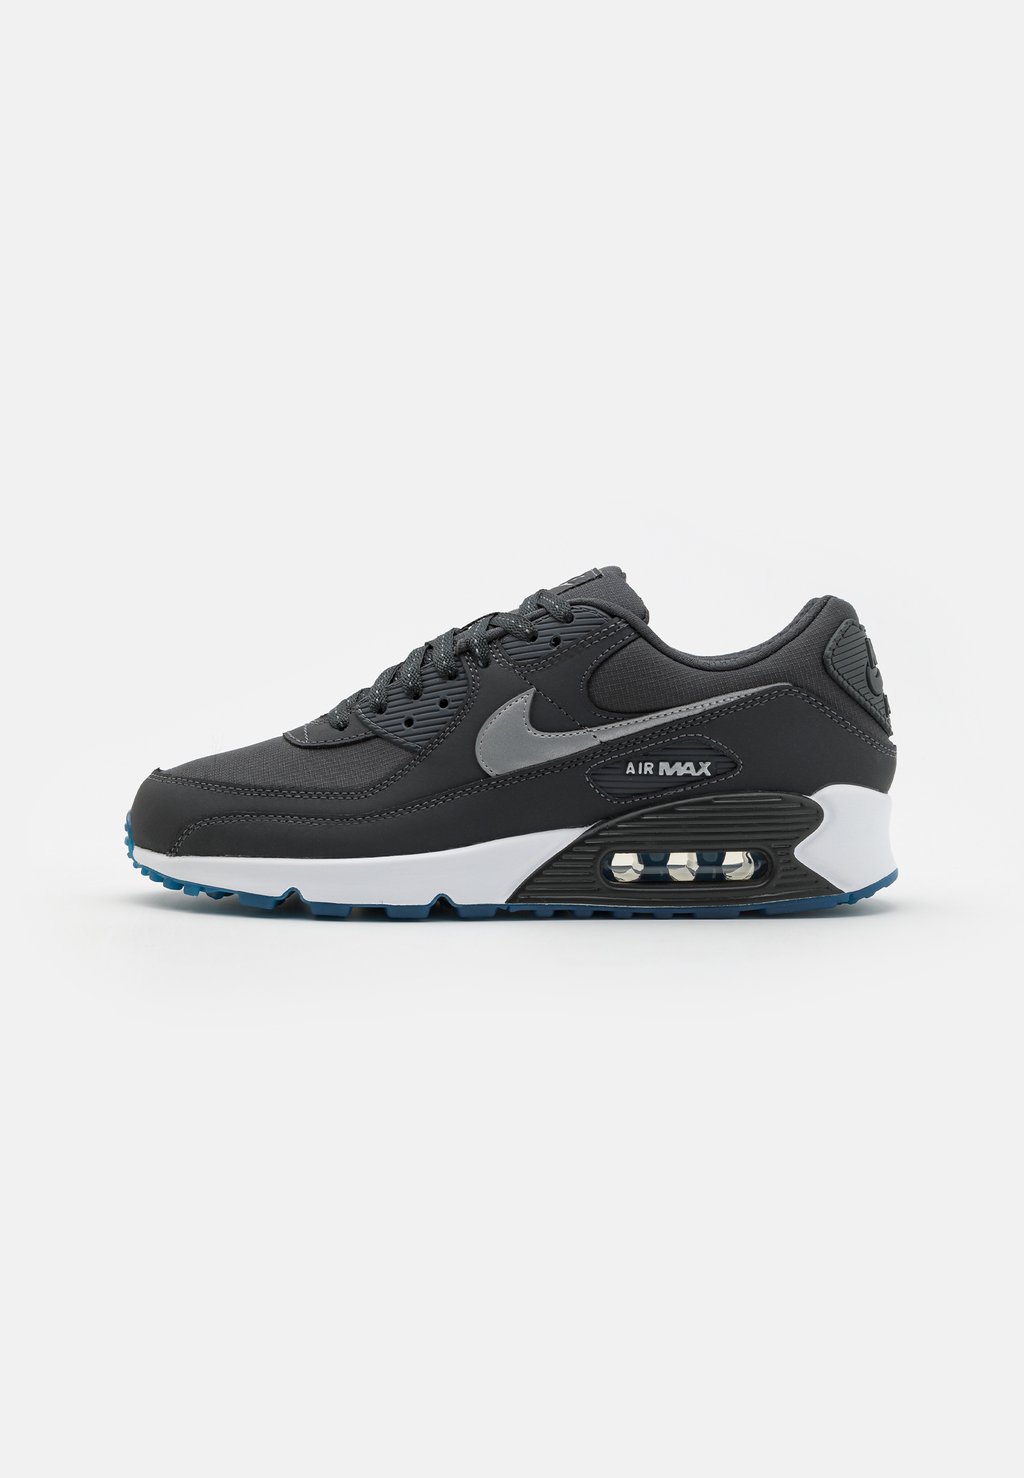 Кроссовки Nike AIR MAX 90 UNISEX, цвет anthracite/reflect silver/industrial blue/white/cool grey